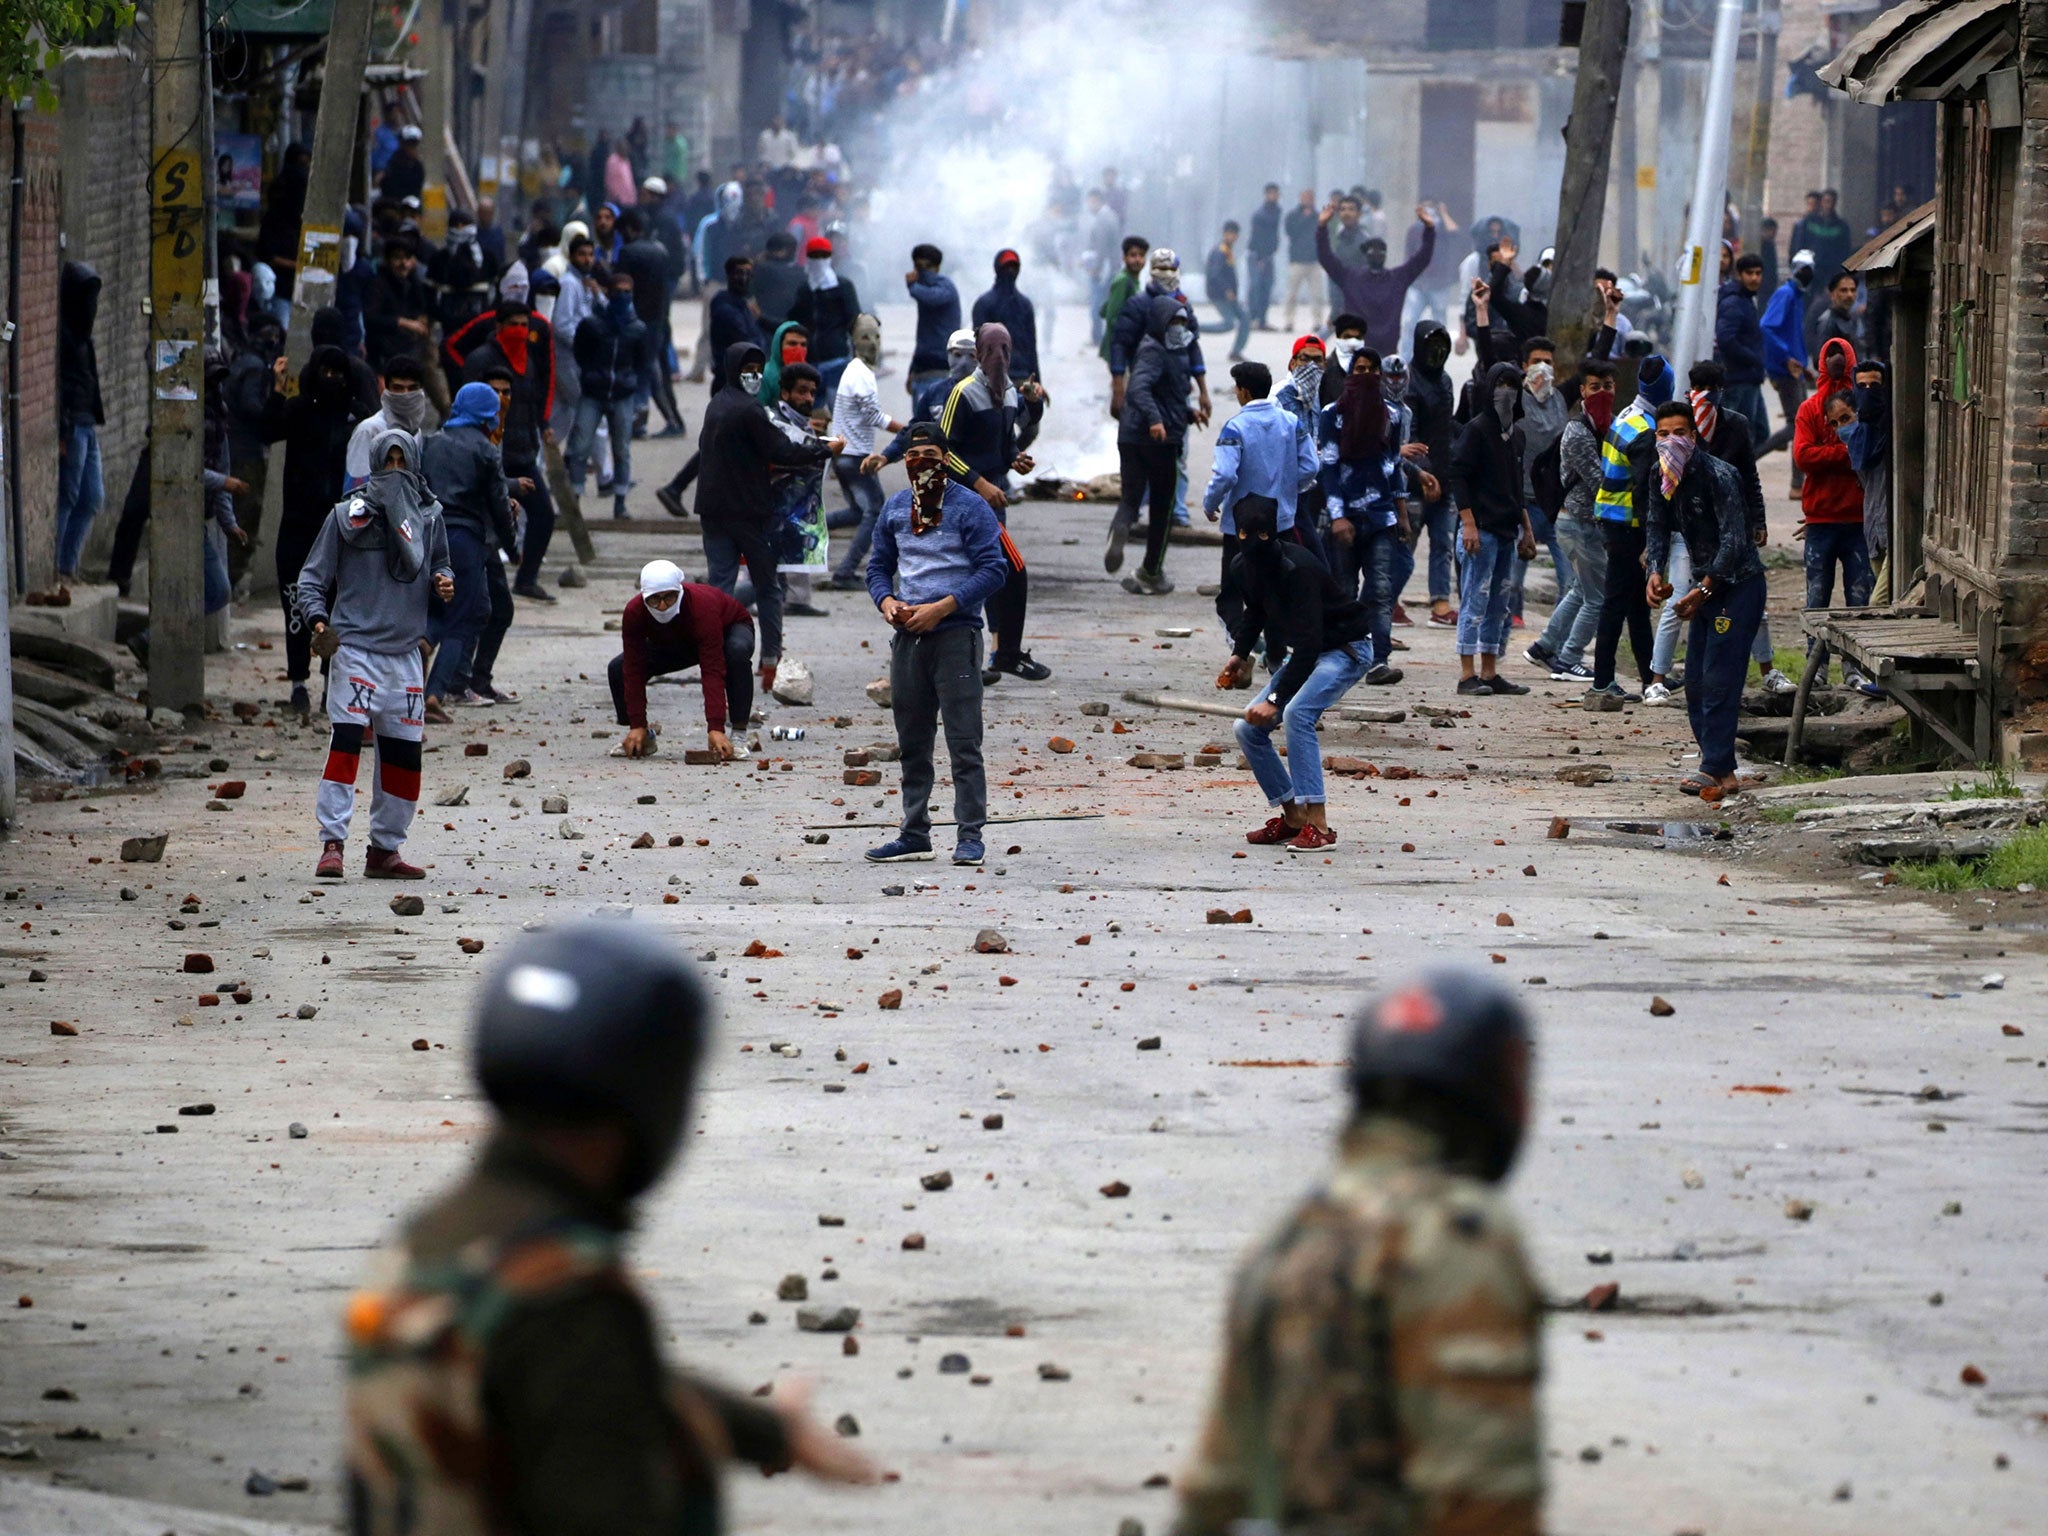 Kashmiri Muslim protesters prepare to throw stones at Indian police and paramilitary men during clashes in downtown area of Srinagar, the summer capital of Indian Kashmir